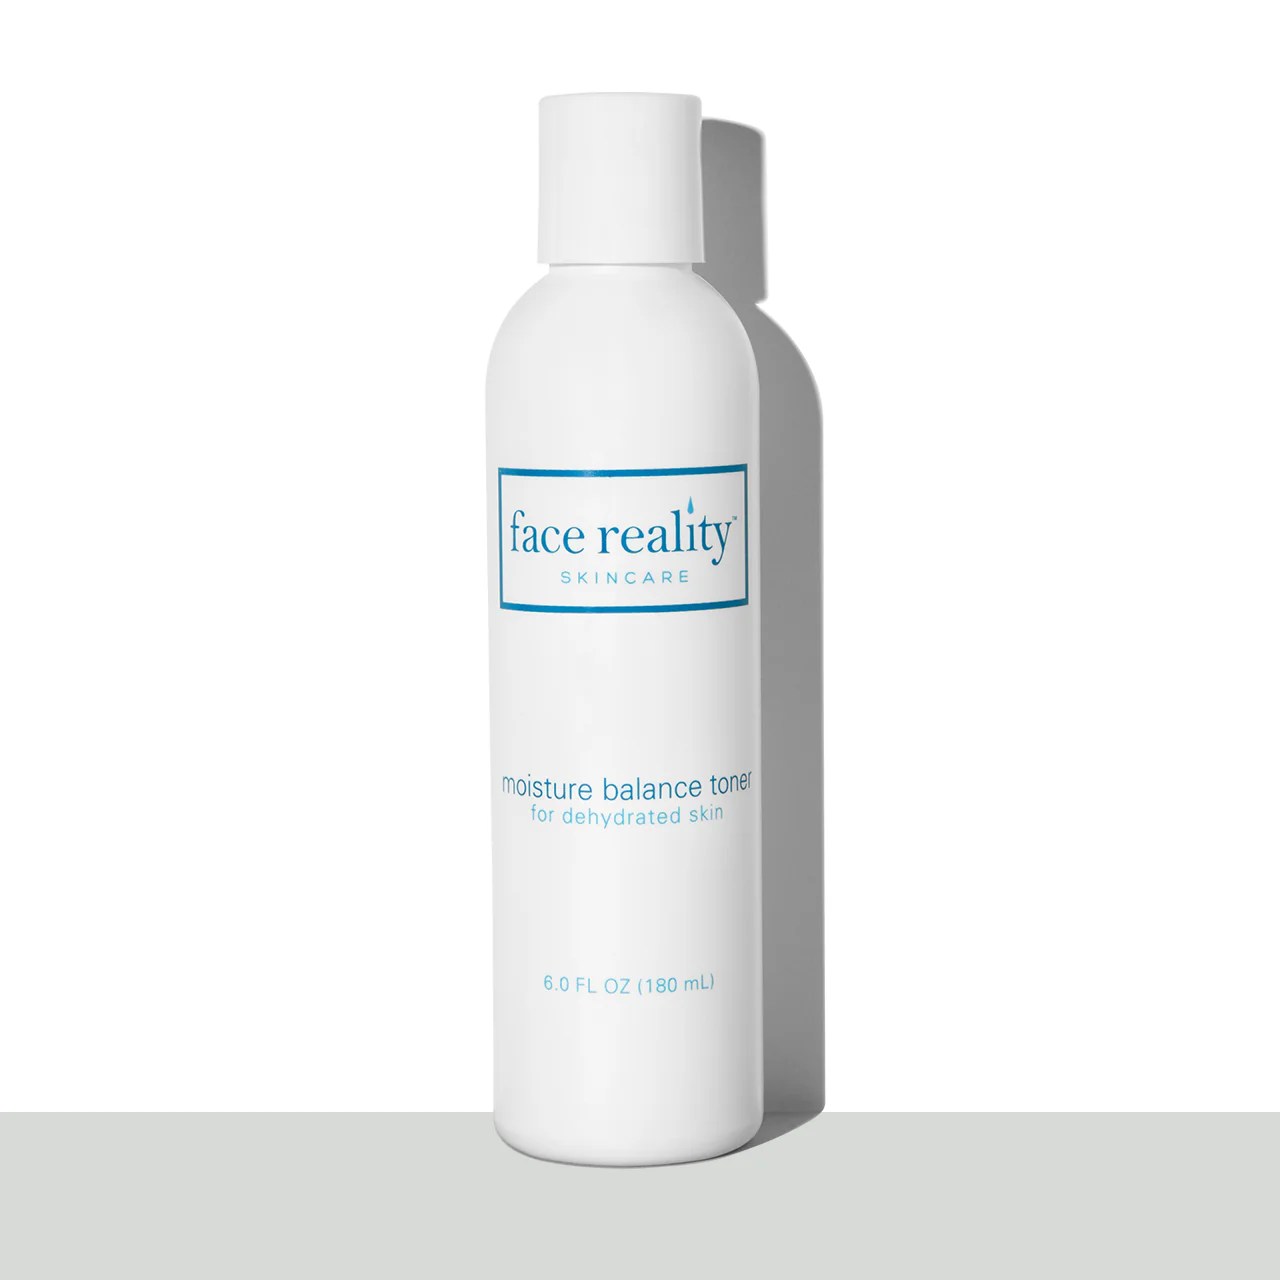 Face Reality Skincare Hydrabalance Hydrating Gel, Quench Your Skin's Thirst for Hydration